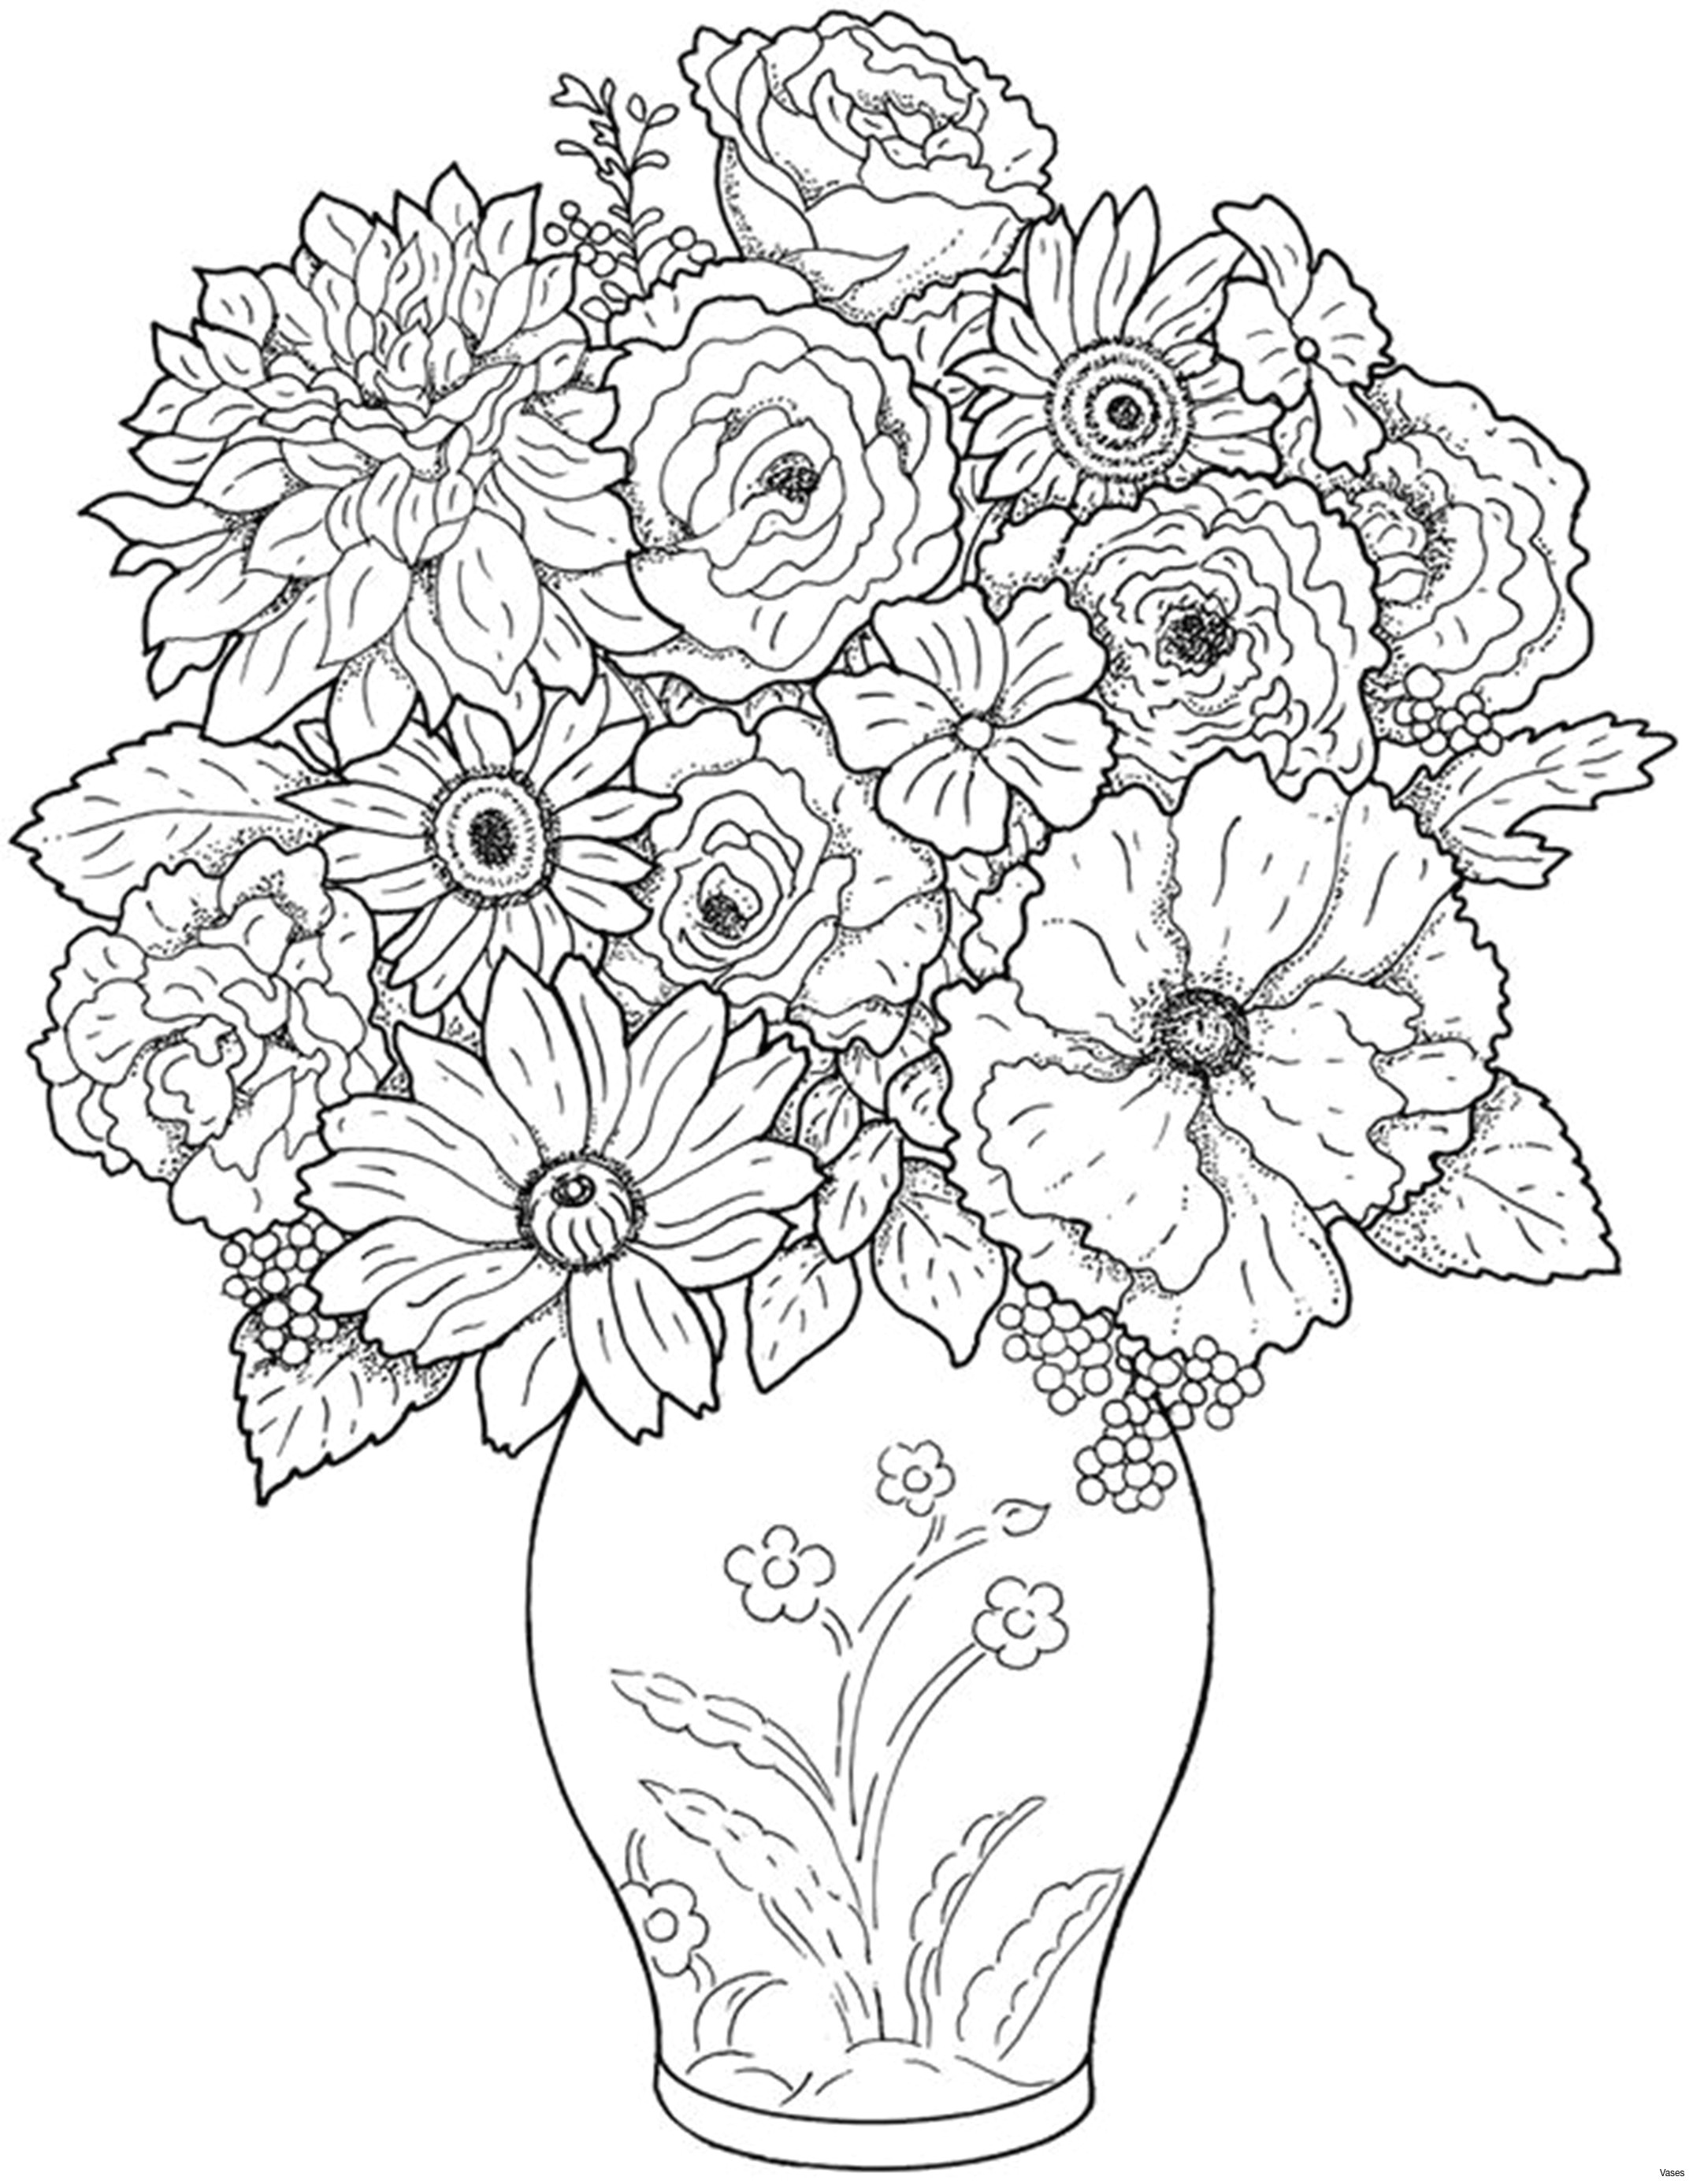 Jar Of Flowers Drawing Www Colouring Pages Aua Ergewohnliche Cool Vases Flower Vase Coloring